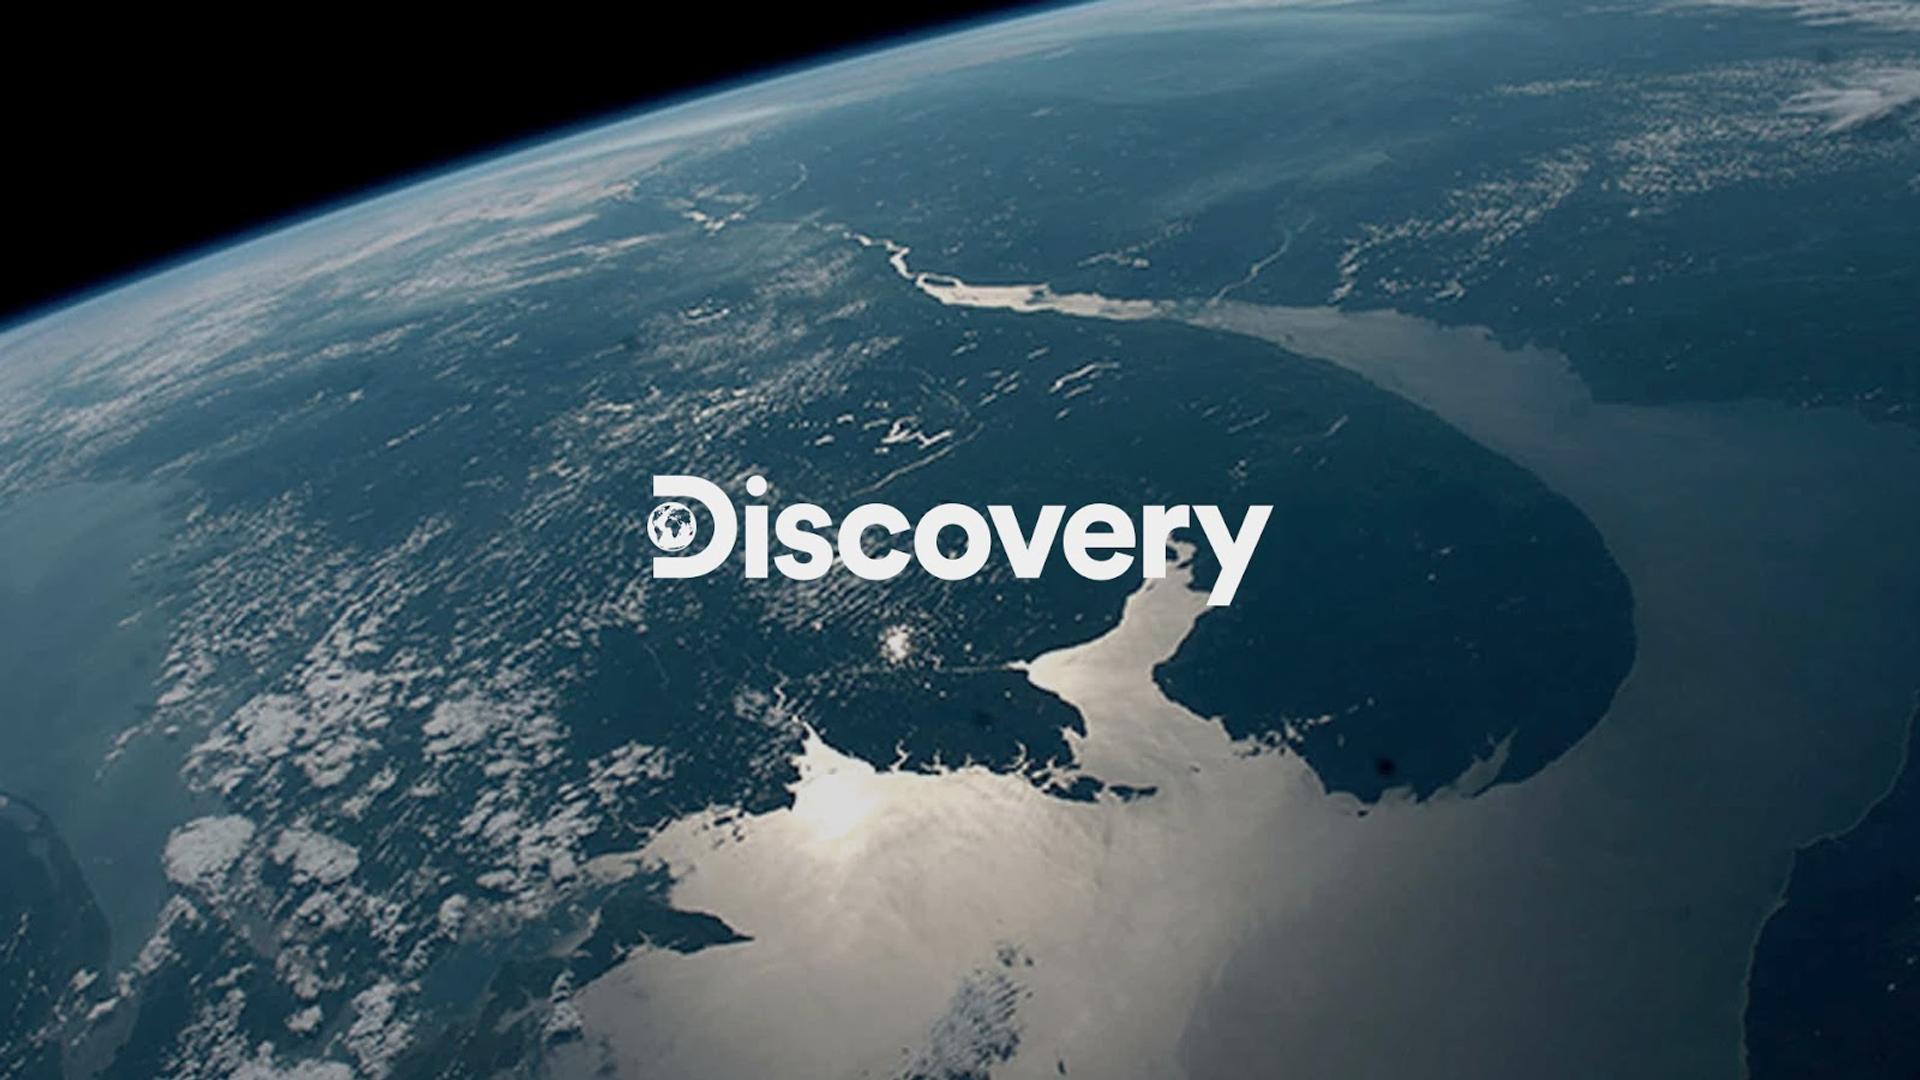 Discovery Channel TVProgramm Trailer & Highlights